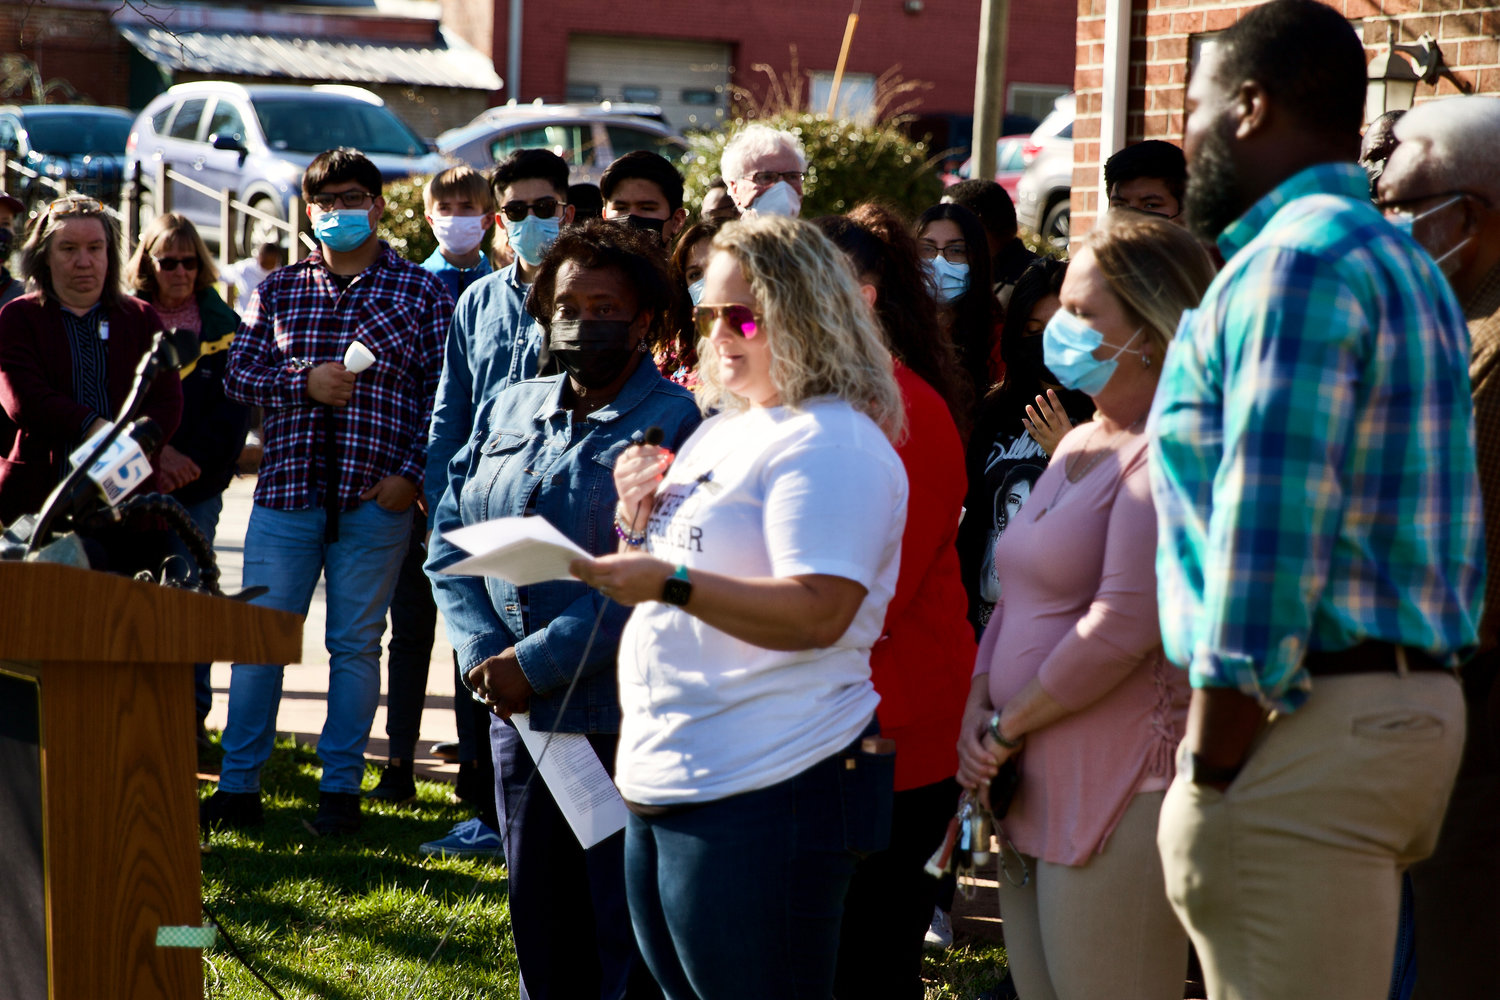 In her remarks to those gathered Monday for the community rally outside First Presbyterian Church, CCS parent Ashley Palmer said the March 4 incidents weren’t the first of a racial nature her children experienced at J.S. Waters.